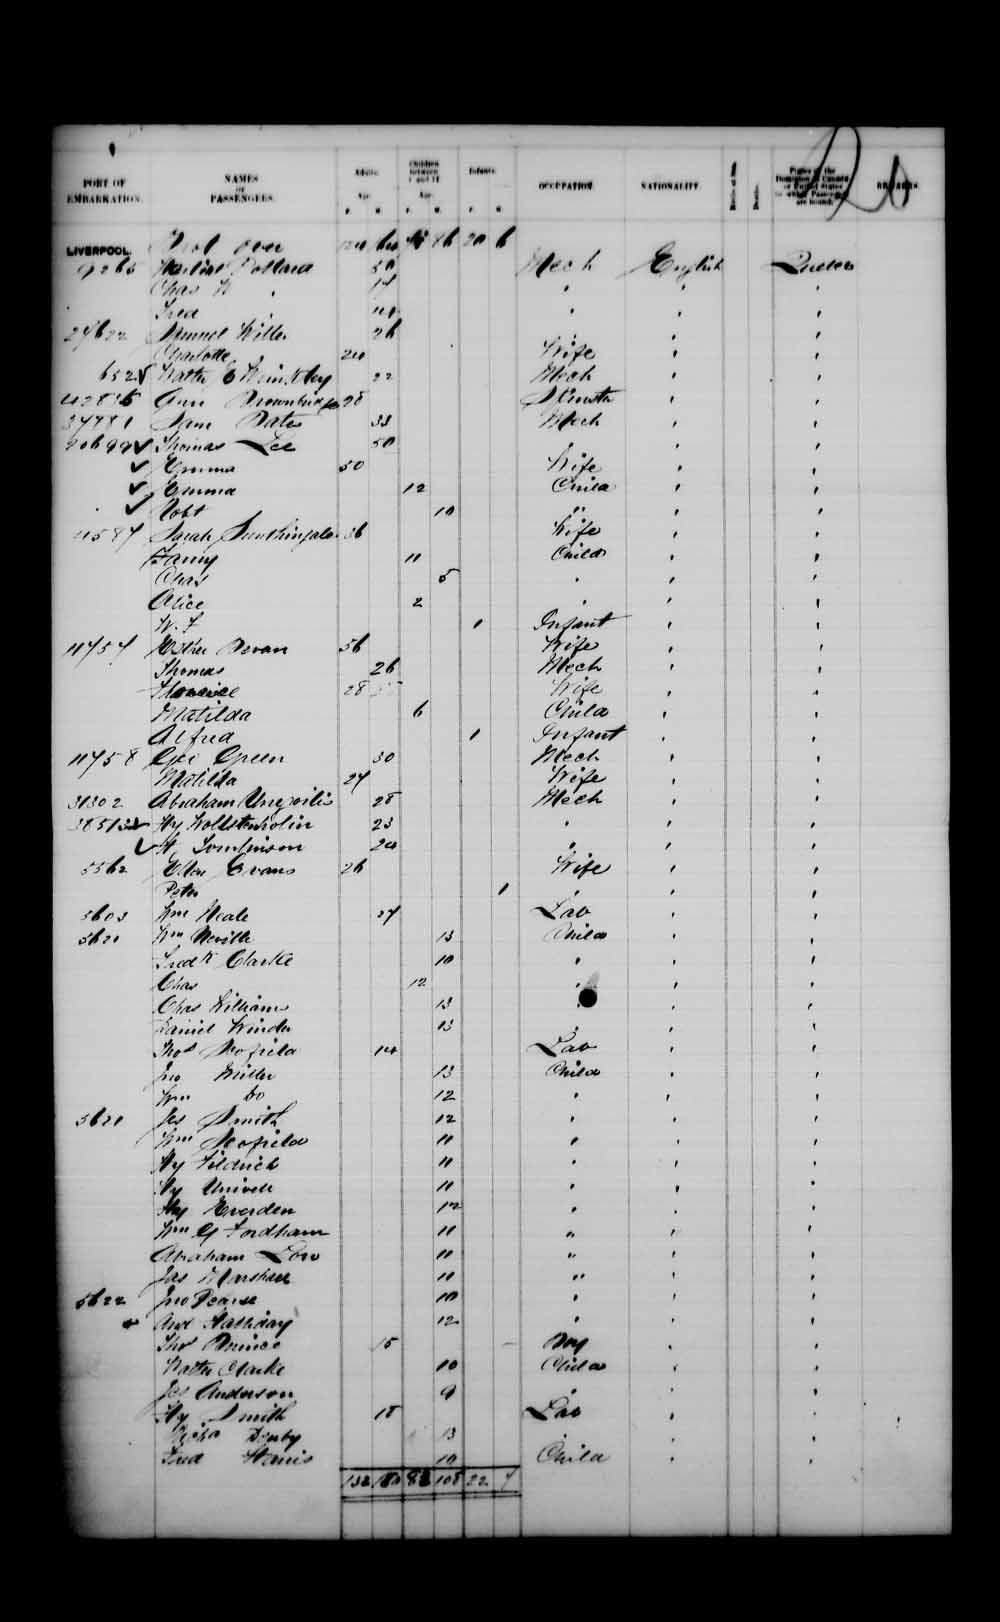 Digitized page of Quebec Passenger Lists for Image No.: e003536003